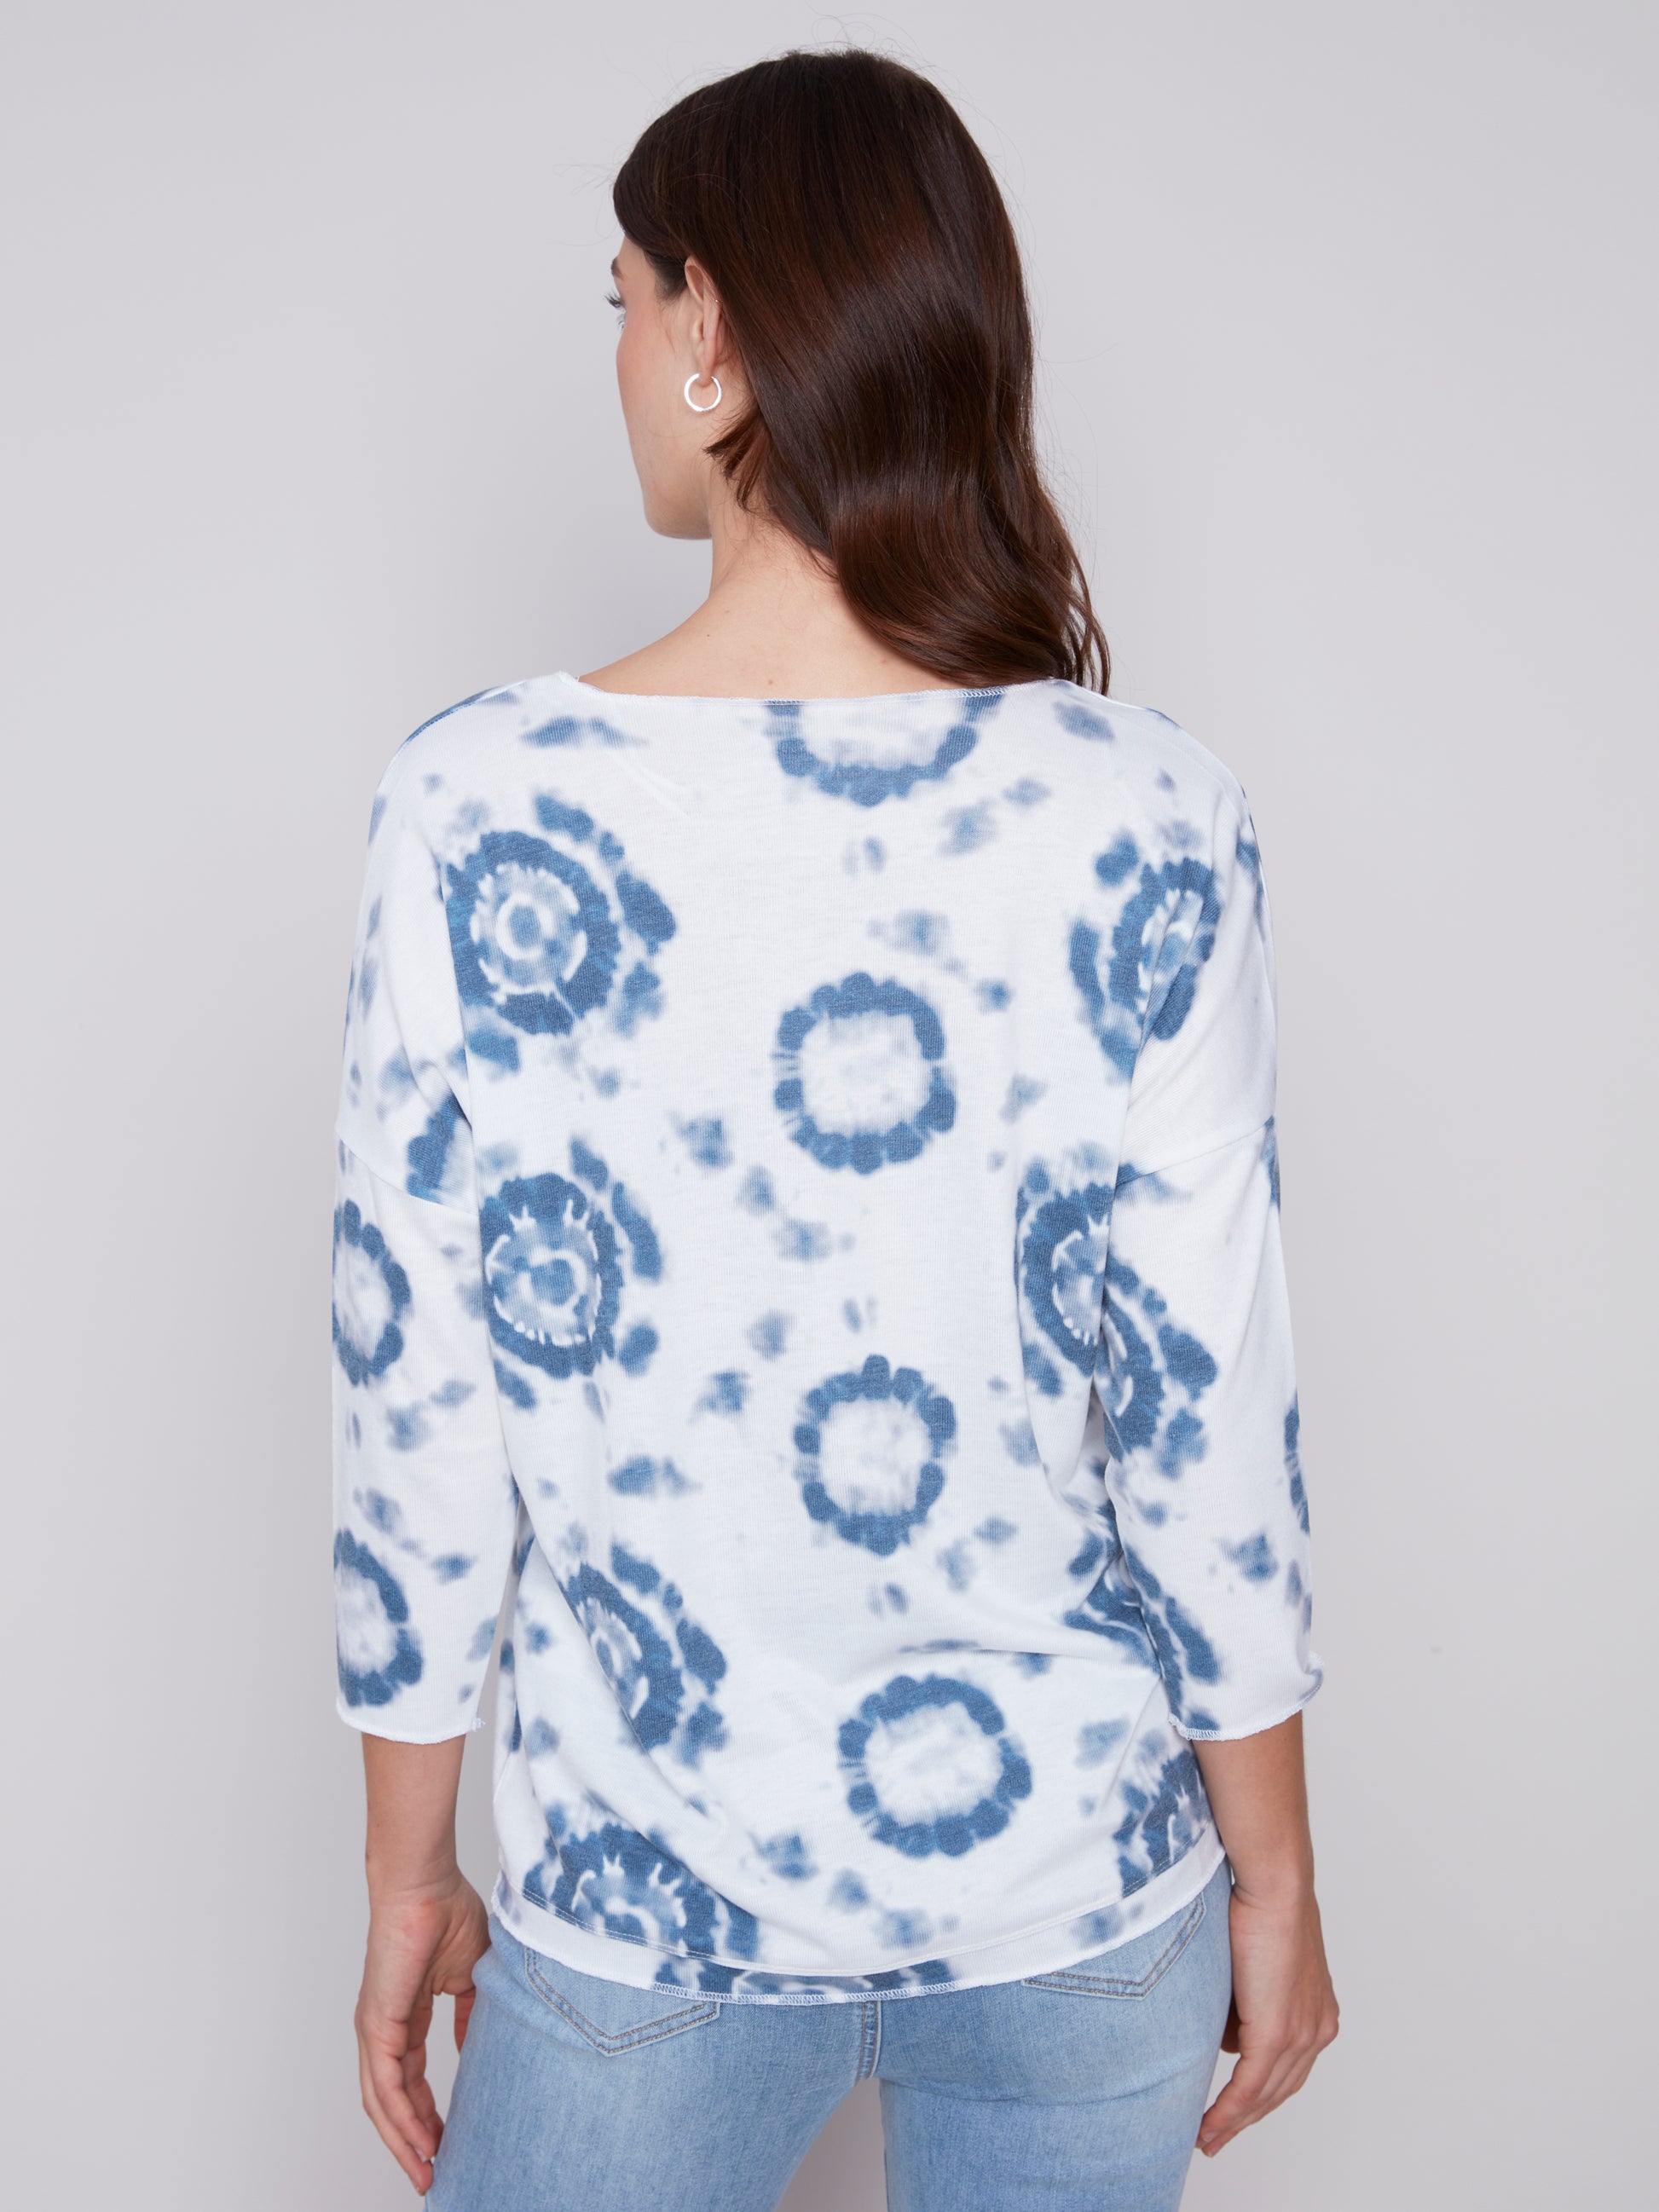 A woman in a stylish, Charlie B Indigo Printed V Neck Top and blue jeans standing against a neutral background.